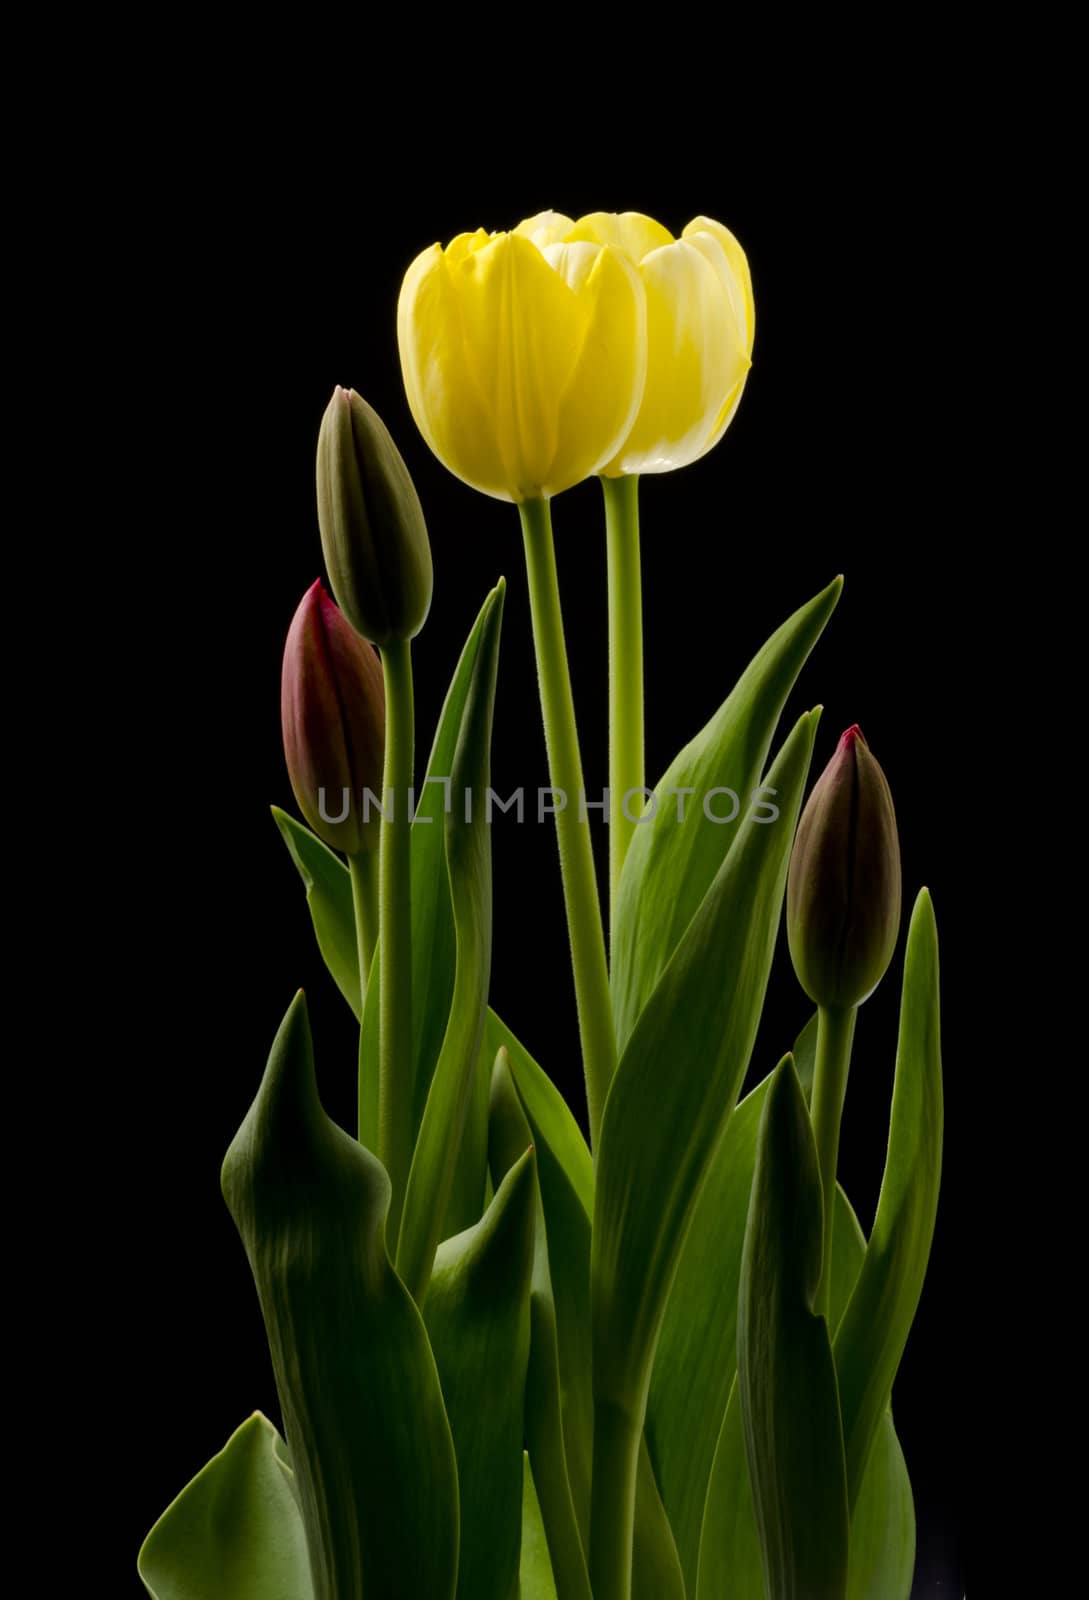 Yellow Tulip Blossoms by Gordo25